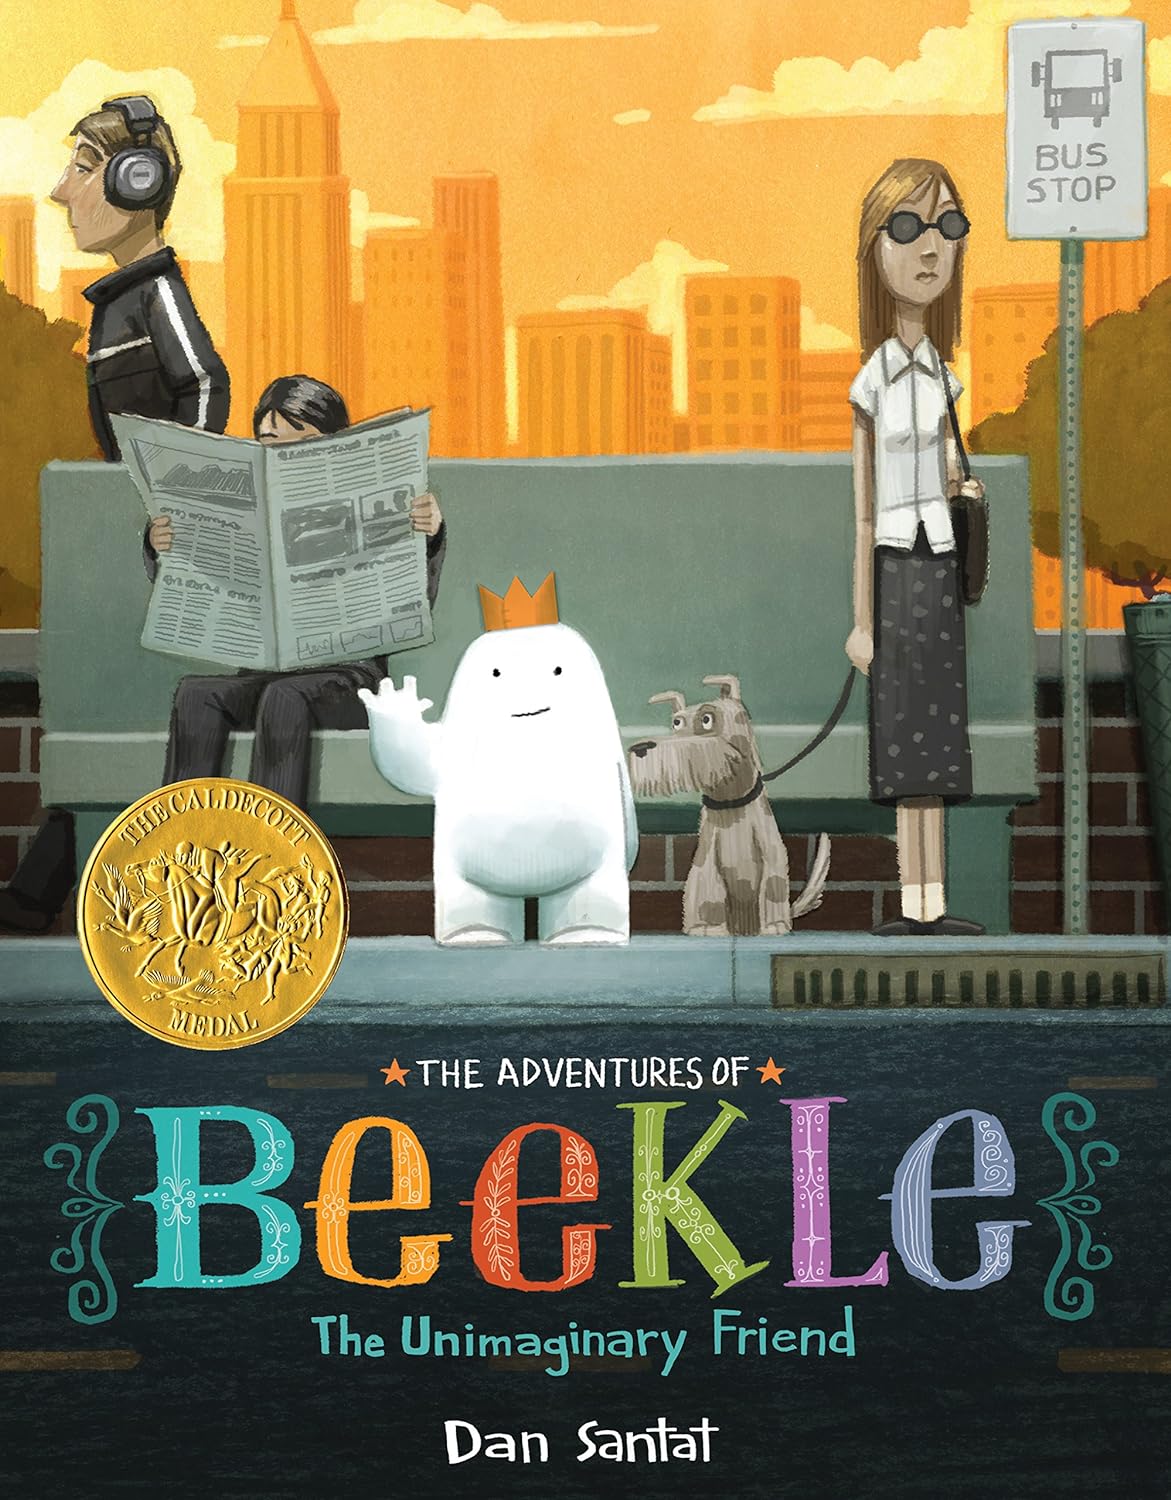 Image for "The Adventures of Beekle"